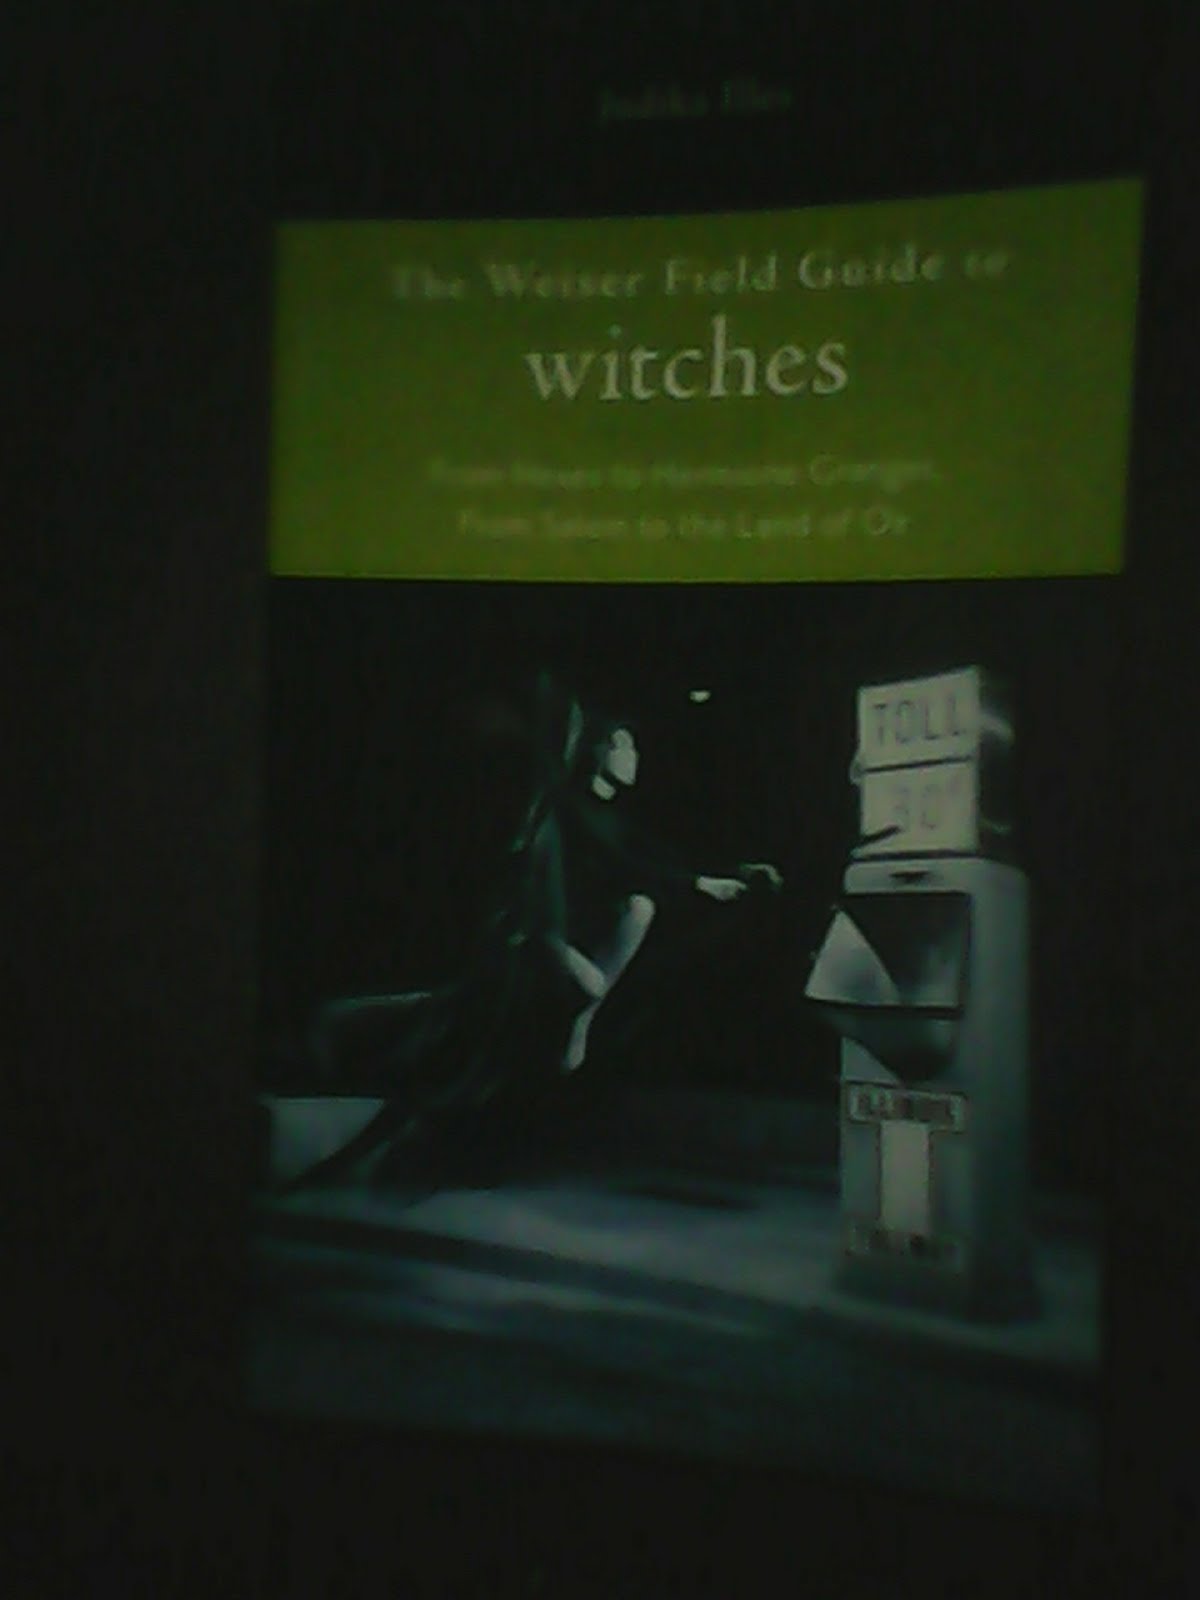 'The Weiser Field Guide to witches' by Judika Illes.